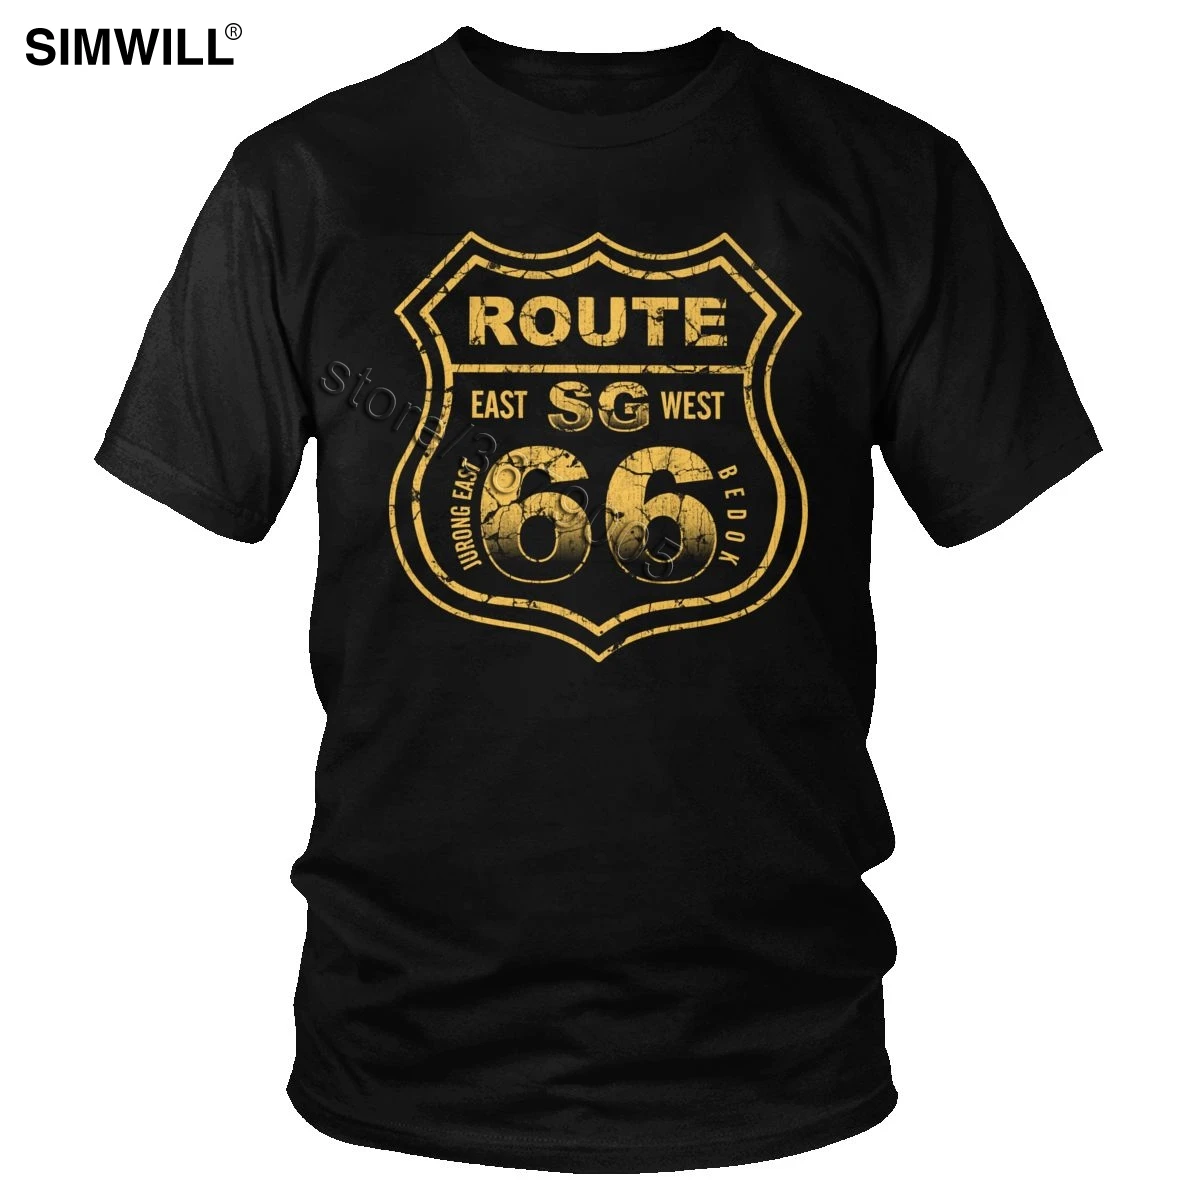 

Vintage Route 66 T Shirt Distressed Mother Road T-shirt Men's Breathable Cotton Tshirt Short Sleeves Grunge U.S Highway Tees